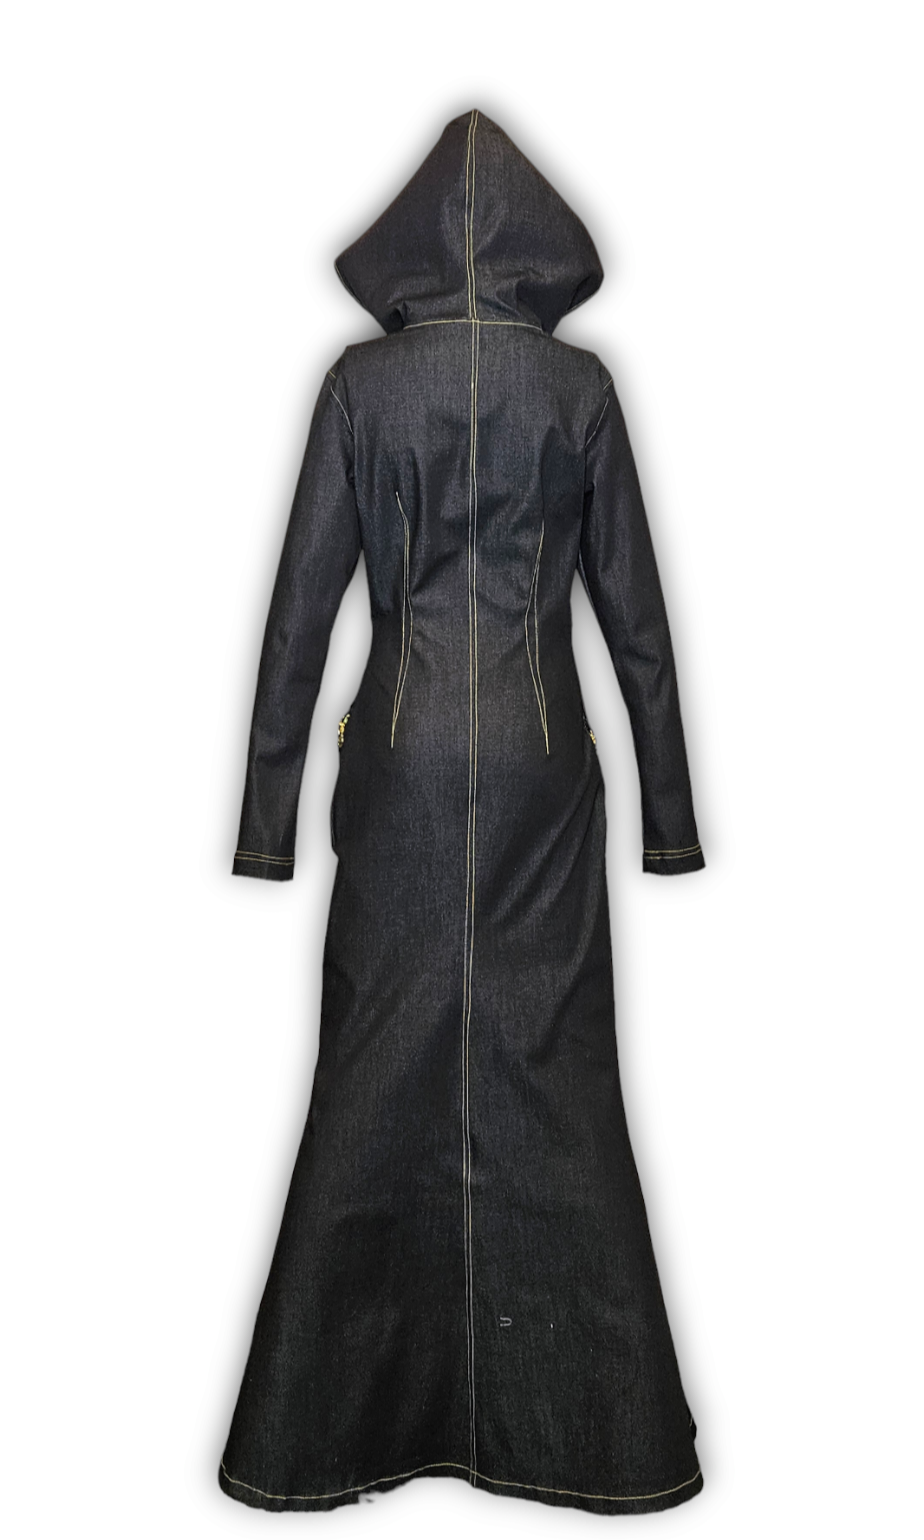 Denim Dress with Hood, and Front Zipper